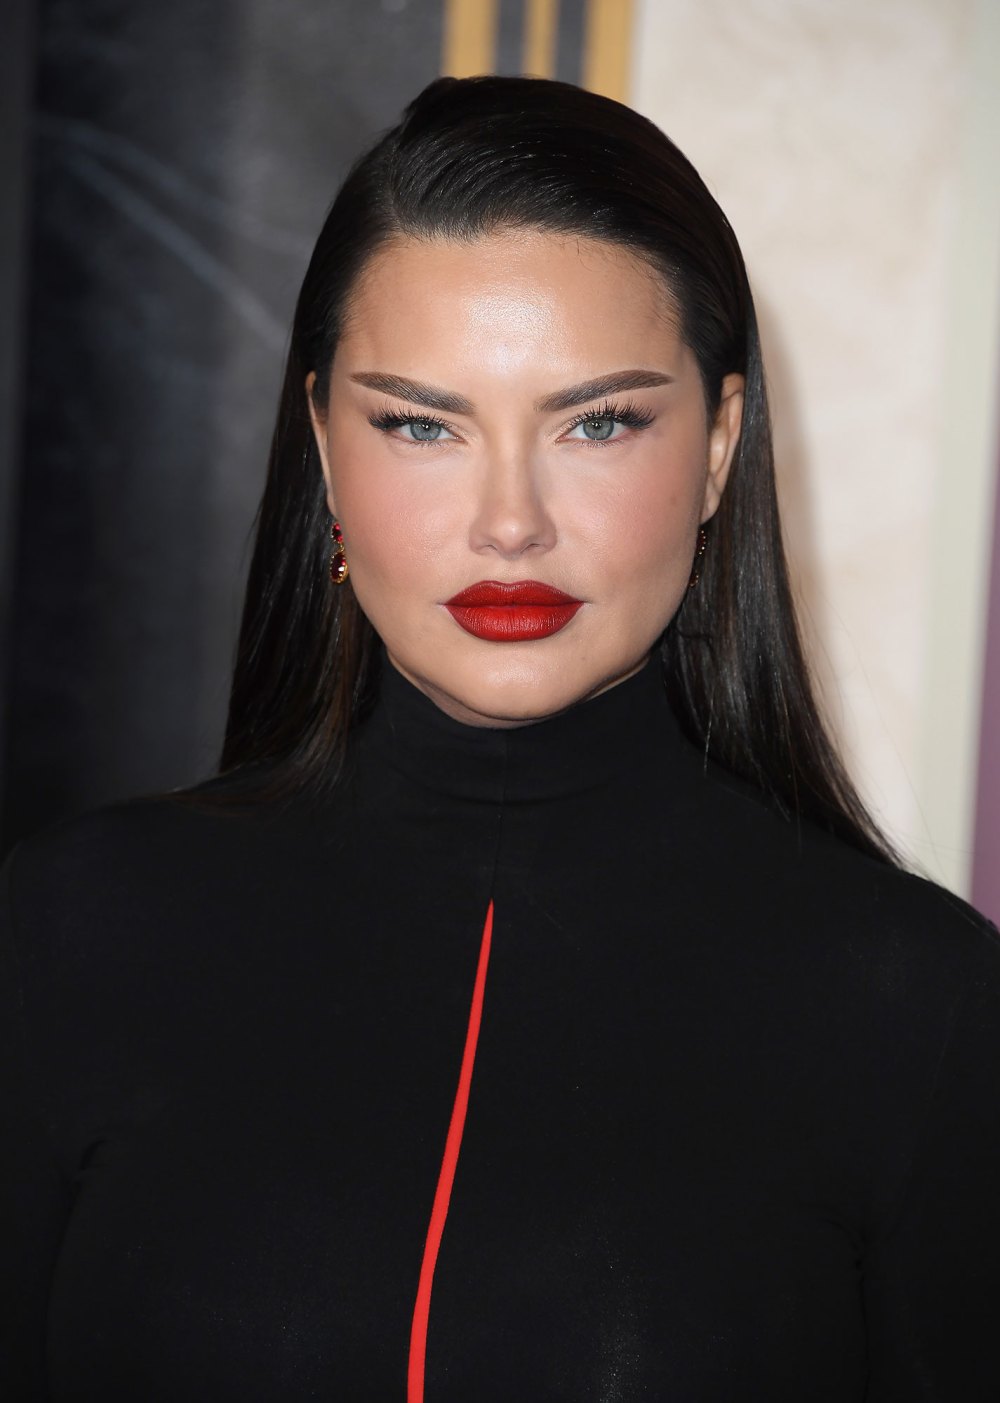 Adriana Lima Was In Shock After Seeing the Photos That Sparked Plastic Surgery Rumors Hunger Games 3